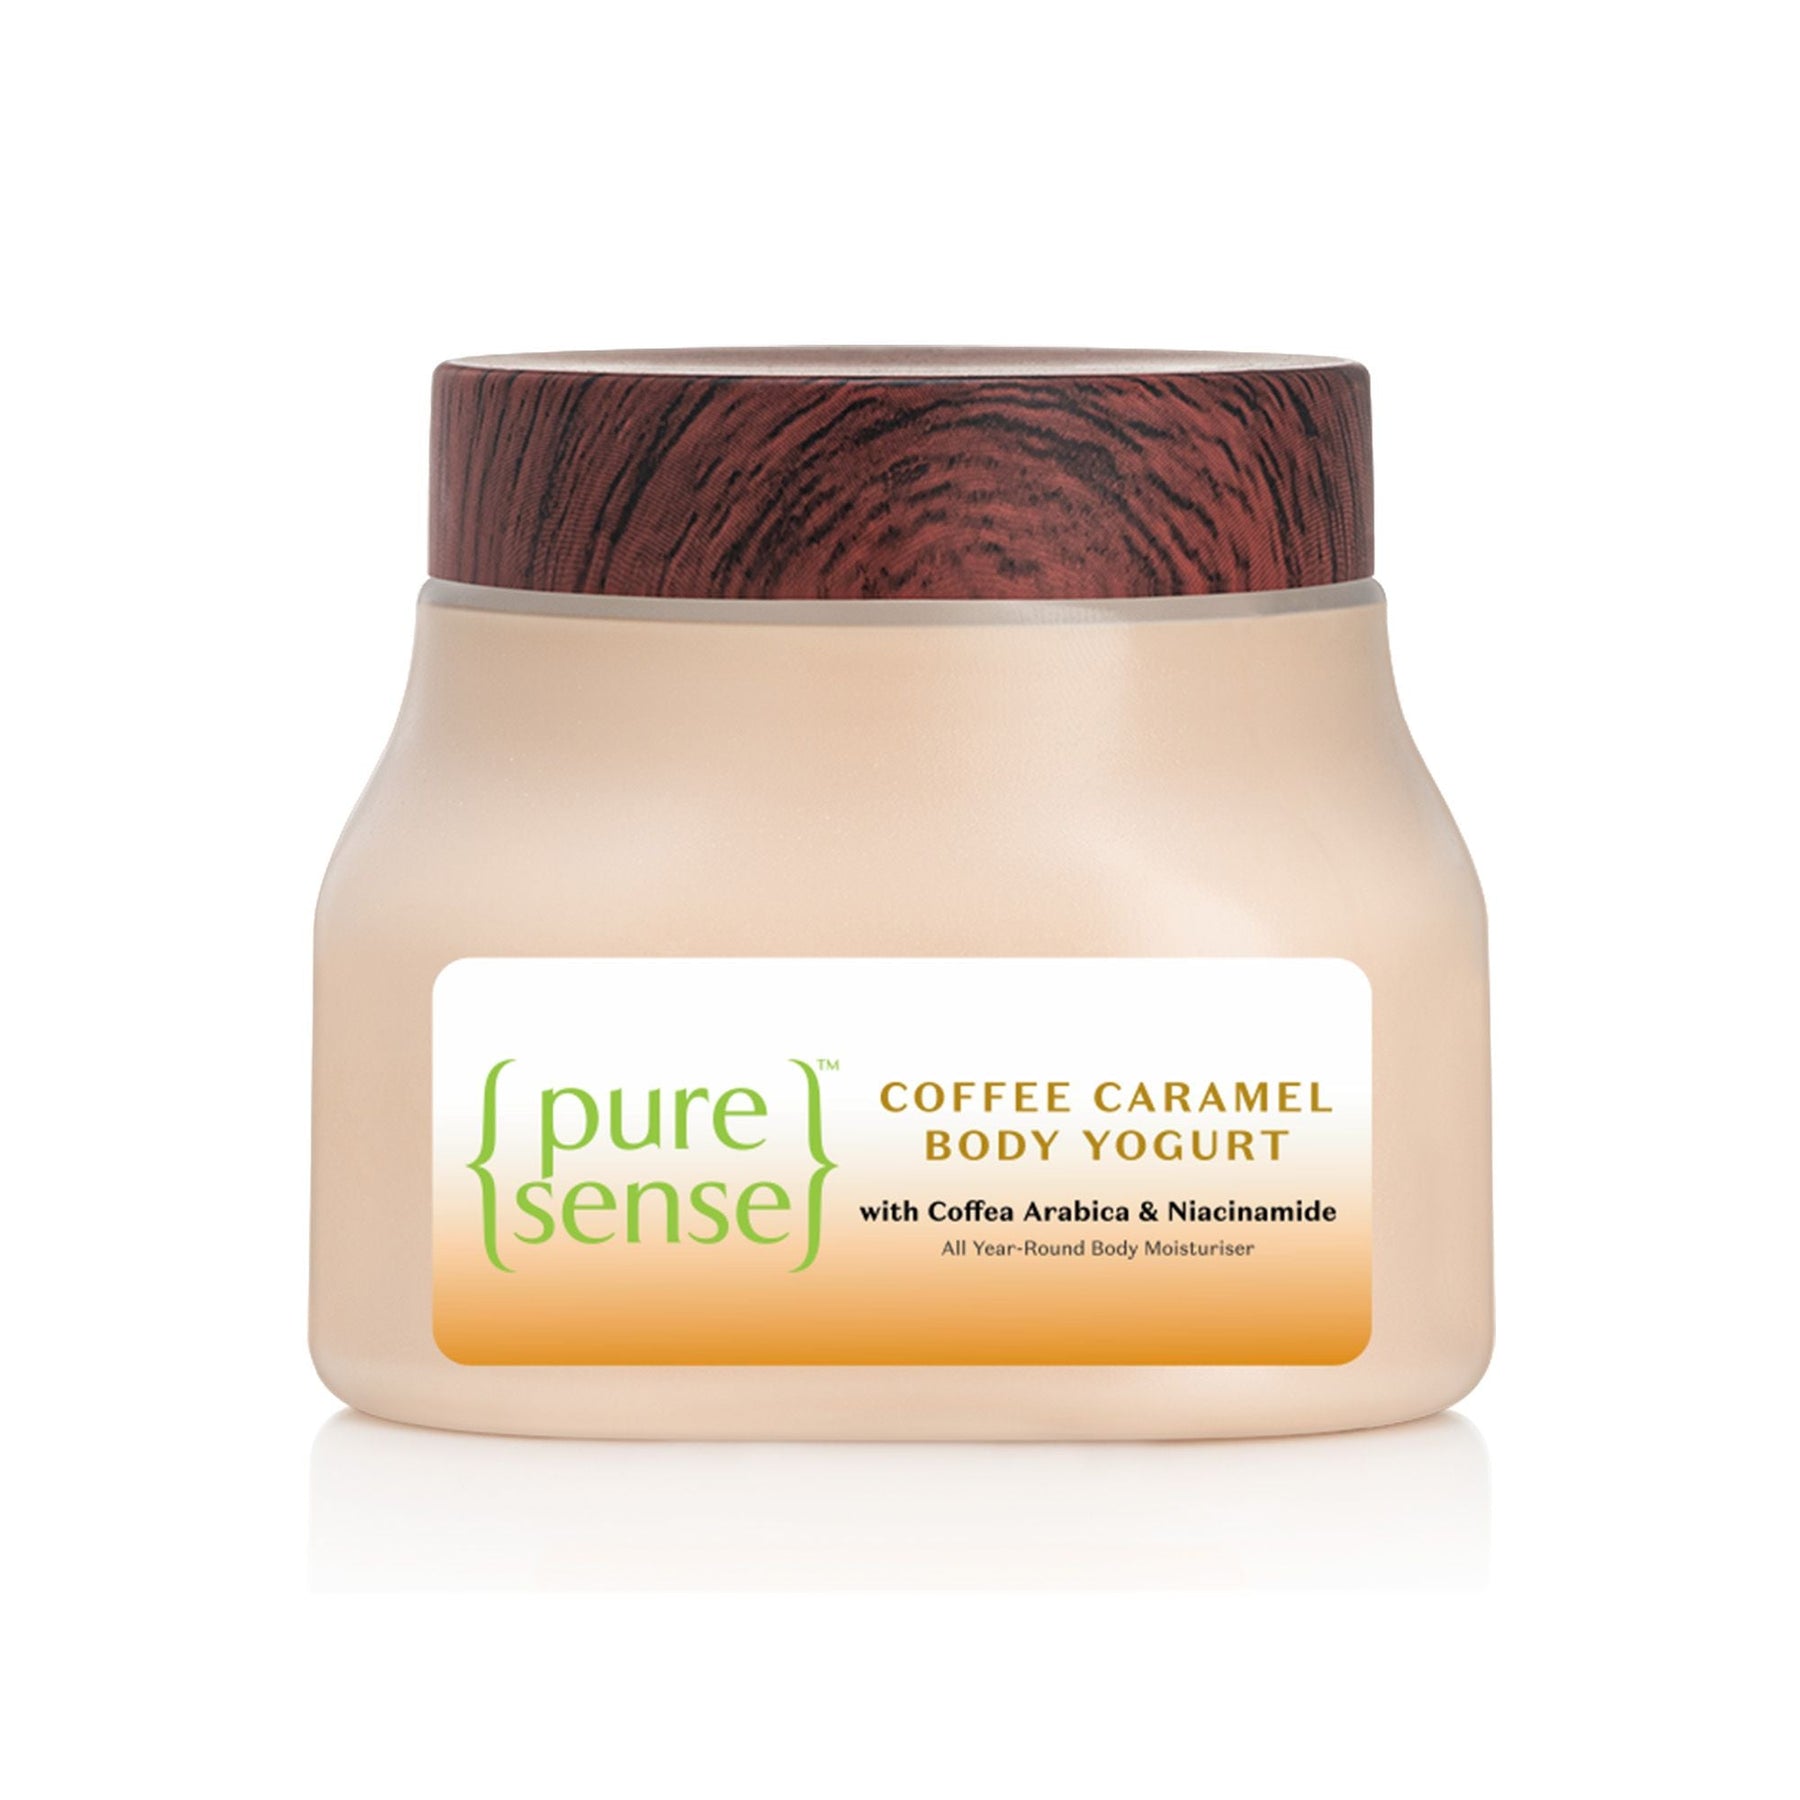 [CRED] Coffee Caramel Body Yogurt | From the makers of Parachute Advansed | 160ml